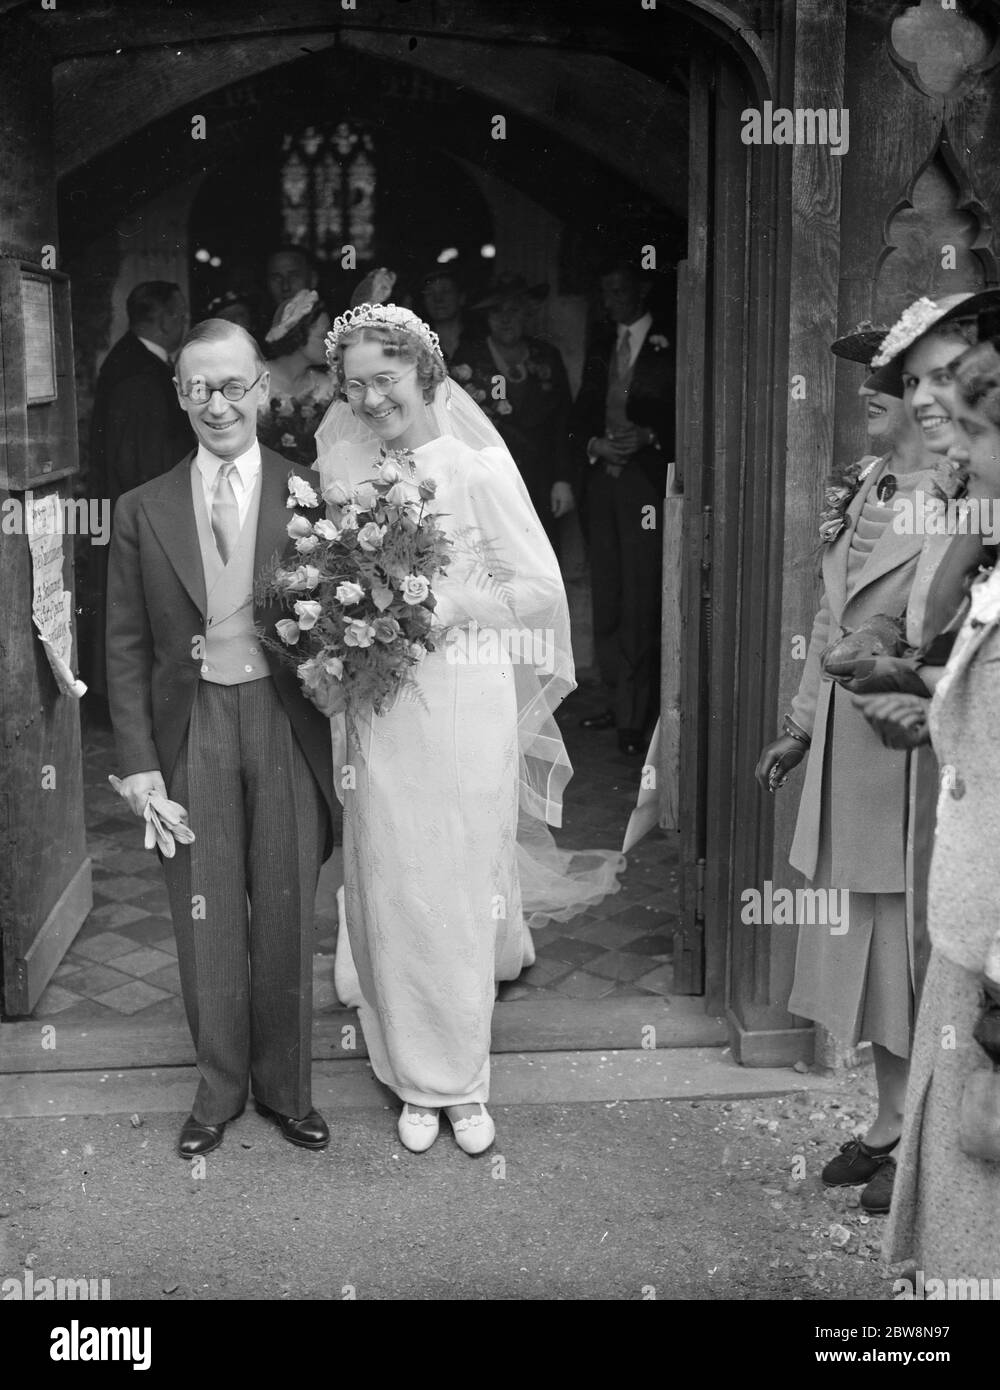 The wedding of D Hickmott and M Lodge . 1938 Stock Photo